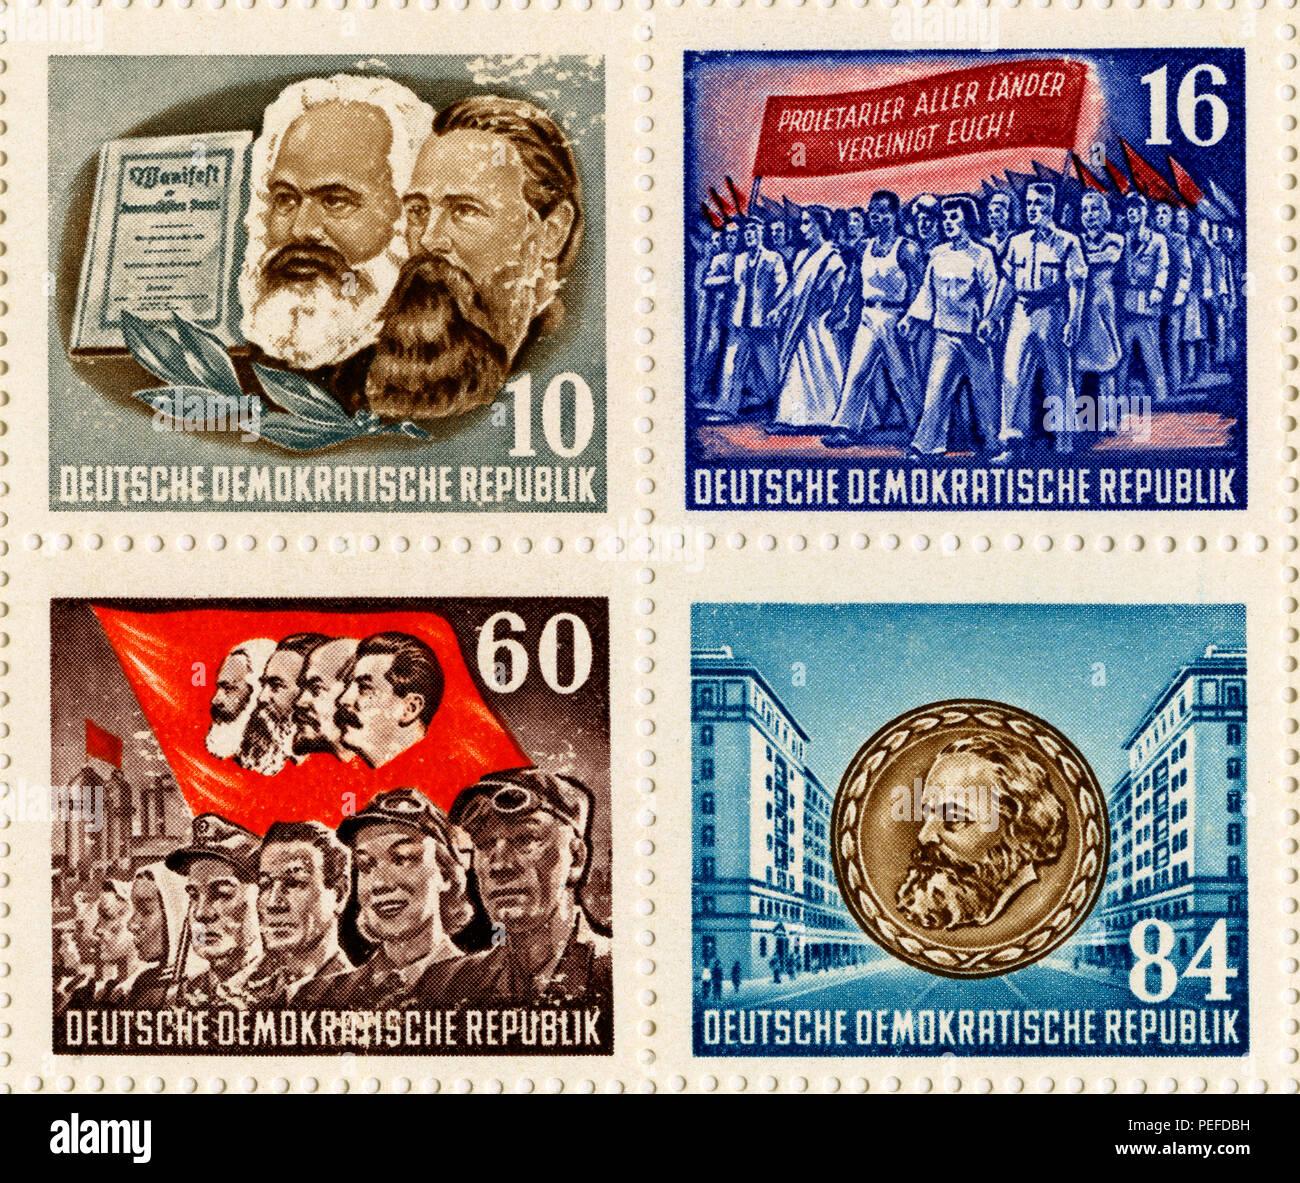 Stamps only from Karl Marx Commemorative Postage Stamp Sheet, East Germany, DDR, 1953 Stock Photo